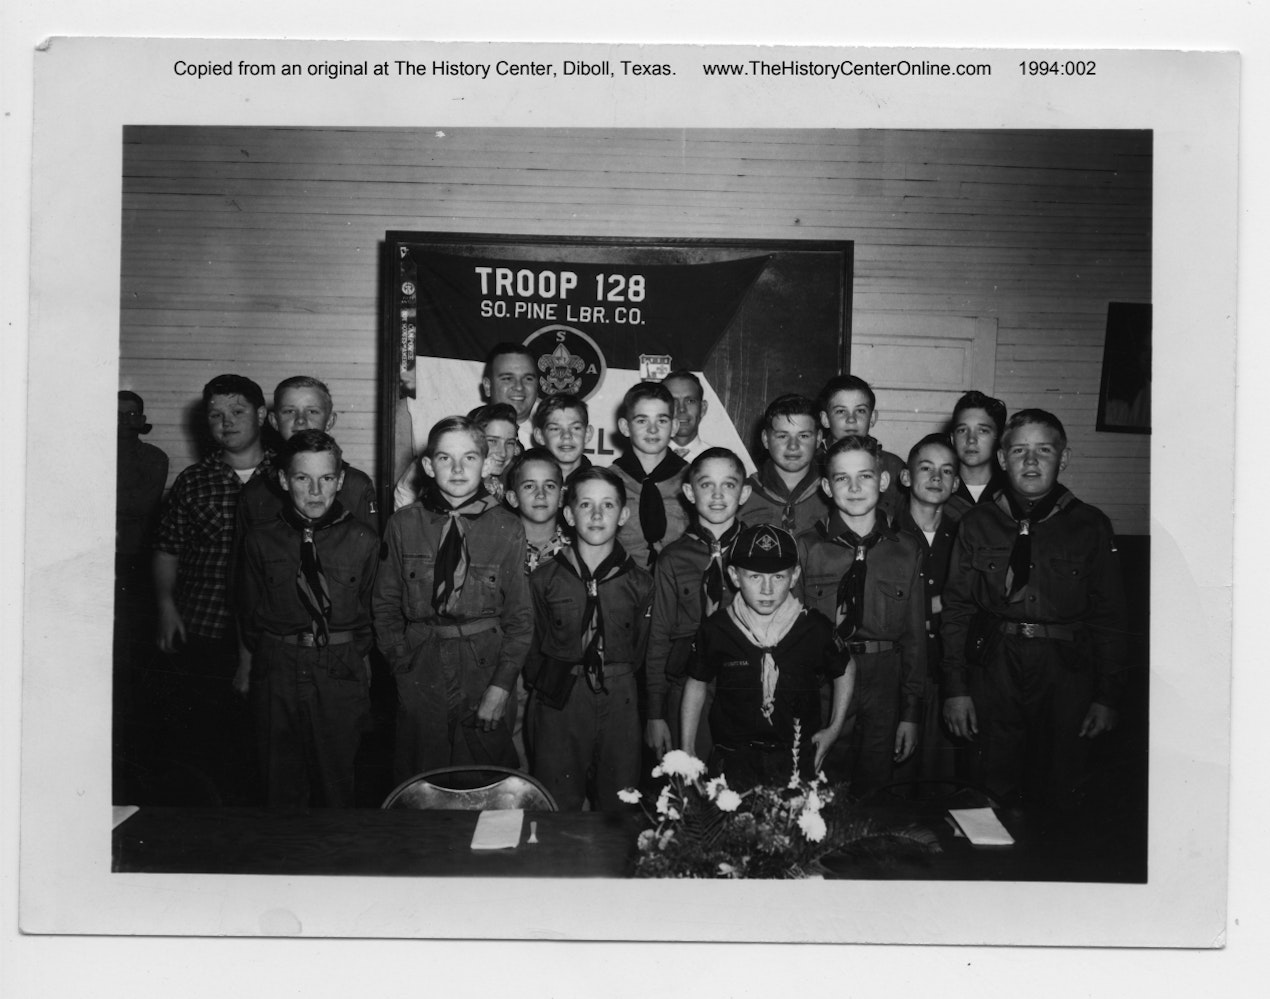 boy-scout-troop-128-1952-the-history-center